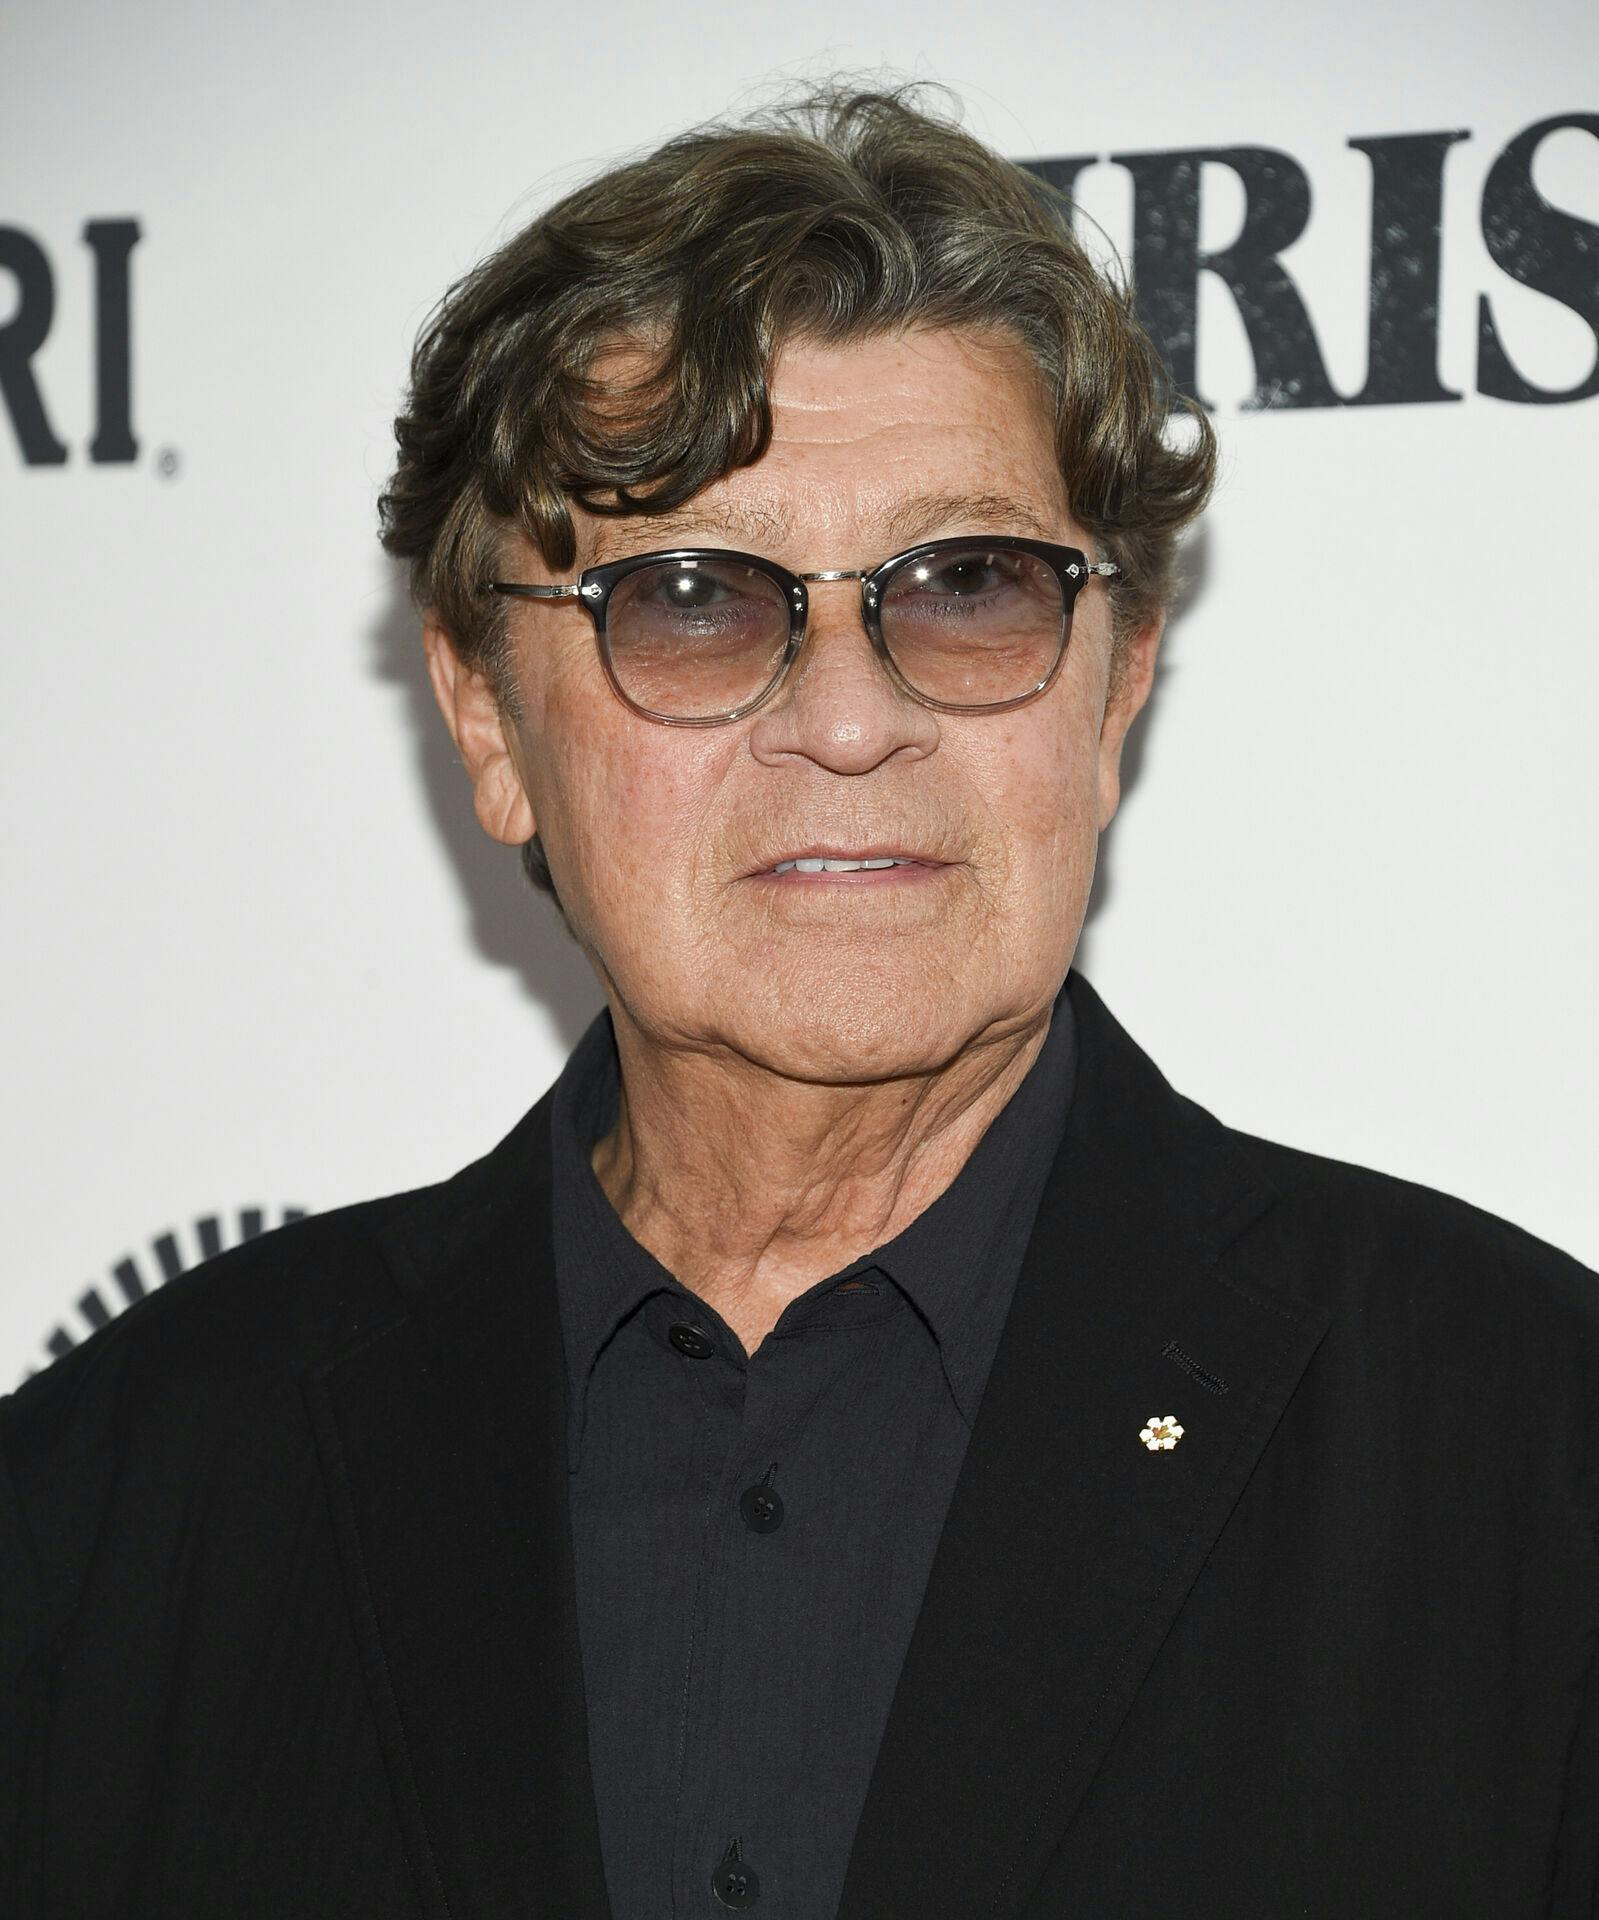 Robbie Robertson attends the world premiere of "The Irishman" at Alice Tully Hall during the opening night of the 57th New York Film Festival on Friday, Sept. 27, 2019, in New York. (Photo by Evan Agostini/Invision/AP)